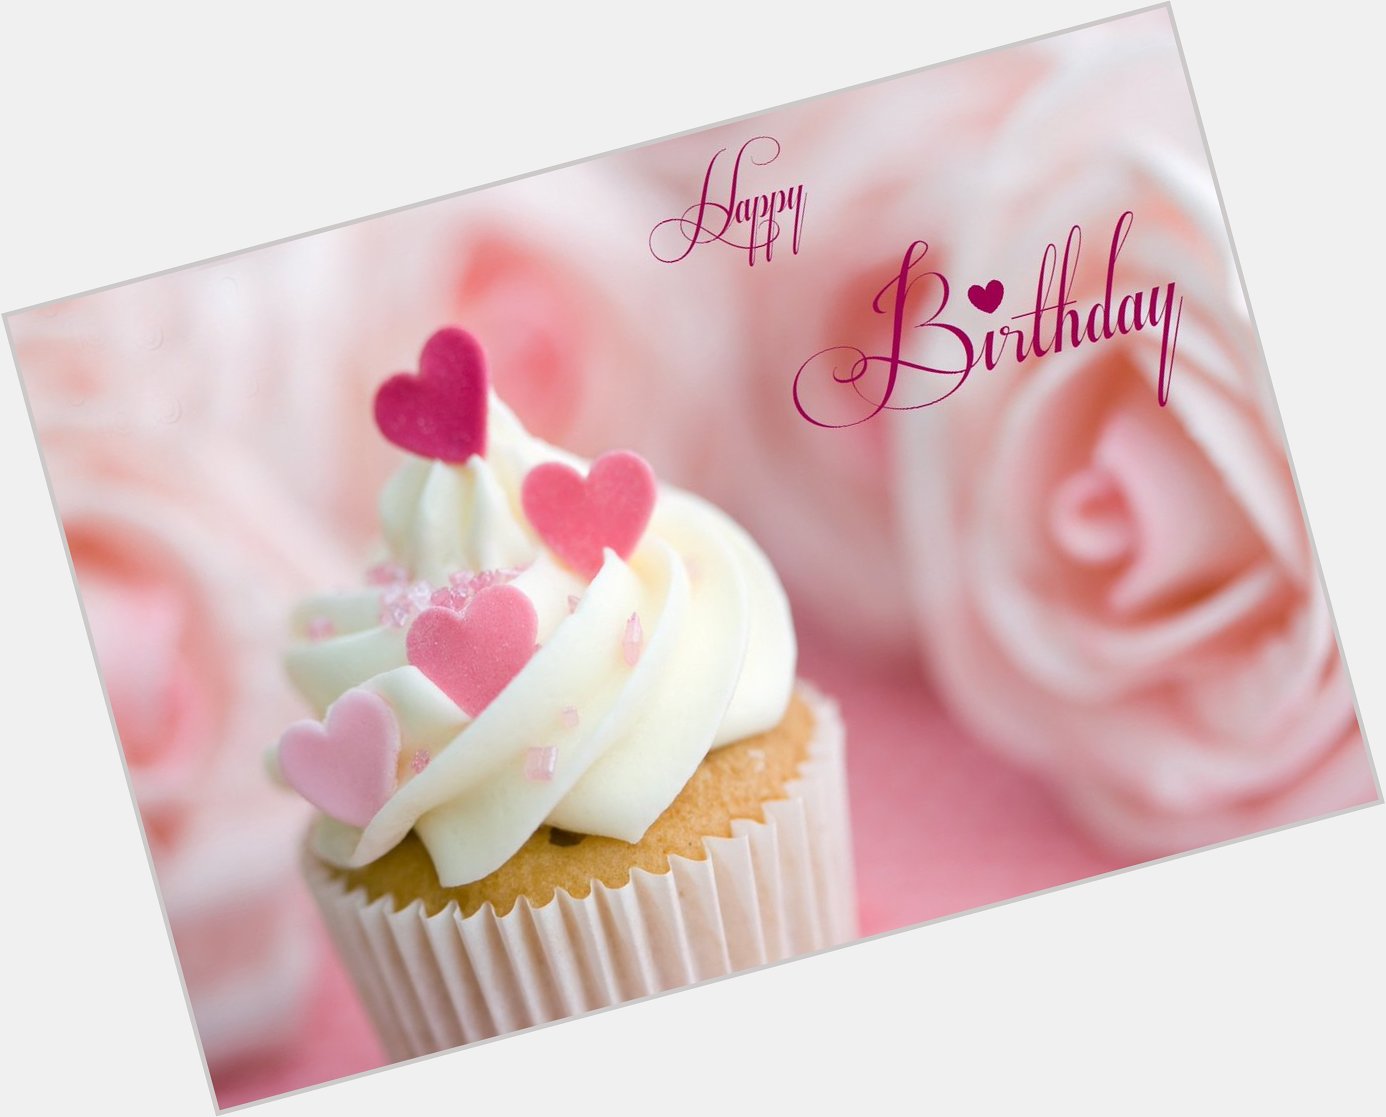  Happy Birthday & Many Happy Returns of the Day. Hope you have a wonderful day & an awesome year ahead 